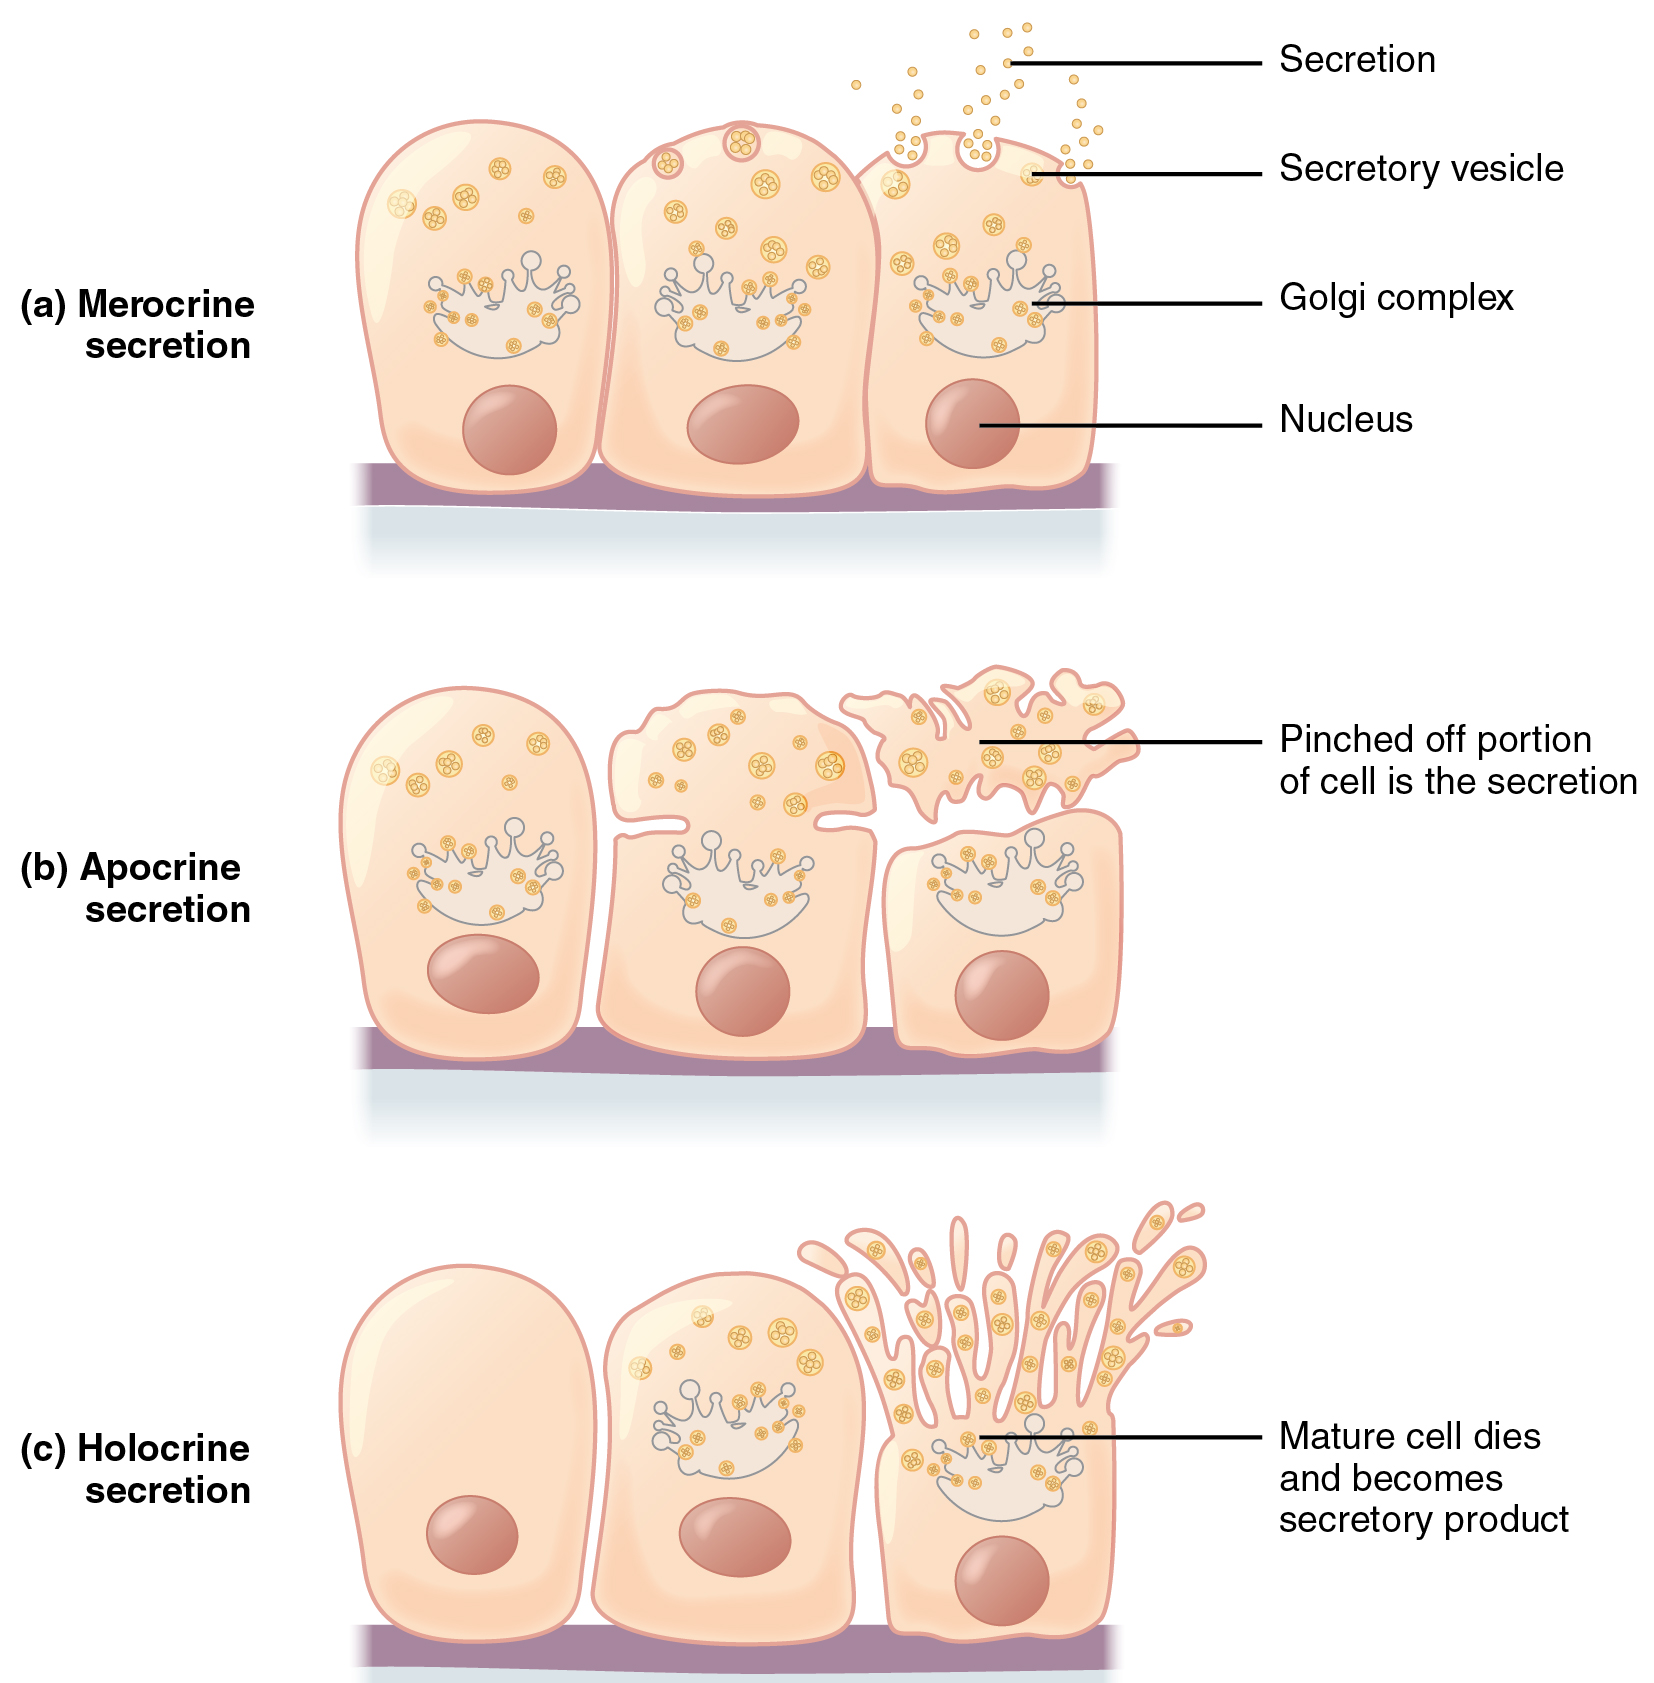 These three diagrams show the three modes of secretion. All three diagrams show three orange cells in a line with attached to a basement membrane. Each cell has a large nucleus in its lower half. The upper half of each cell contains a Golgi apparatus, which appears like an upside down jellyfish. Yellow secretory vesicles are budding from the top end of the Golgi apparatus. Each vesicle contains several orange circles, which are the secreted substance. In merocrine secretion, the secretory vesicles travel to the top edge of the cells and release the secretion from the cell by melding with the cell membrane. In apocrine secretion, the top third of the cell, which contains the secretory vesicles, pinches in at the sides and then completely disconnects above the Golgi complex. The pinched off portion of the cell is the secretion, as it contains the majority of the secretory vesicles. In holocrine secretion, the upper third of the cell, just above the Golgi complex, forms many finger like projections. Each projection contains several vesicles. The tips of the projections that contain secretory vesicles bud off from the cell. In this method of secretion, the mature cell eventually dies and becomes the secretory product.